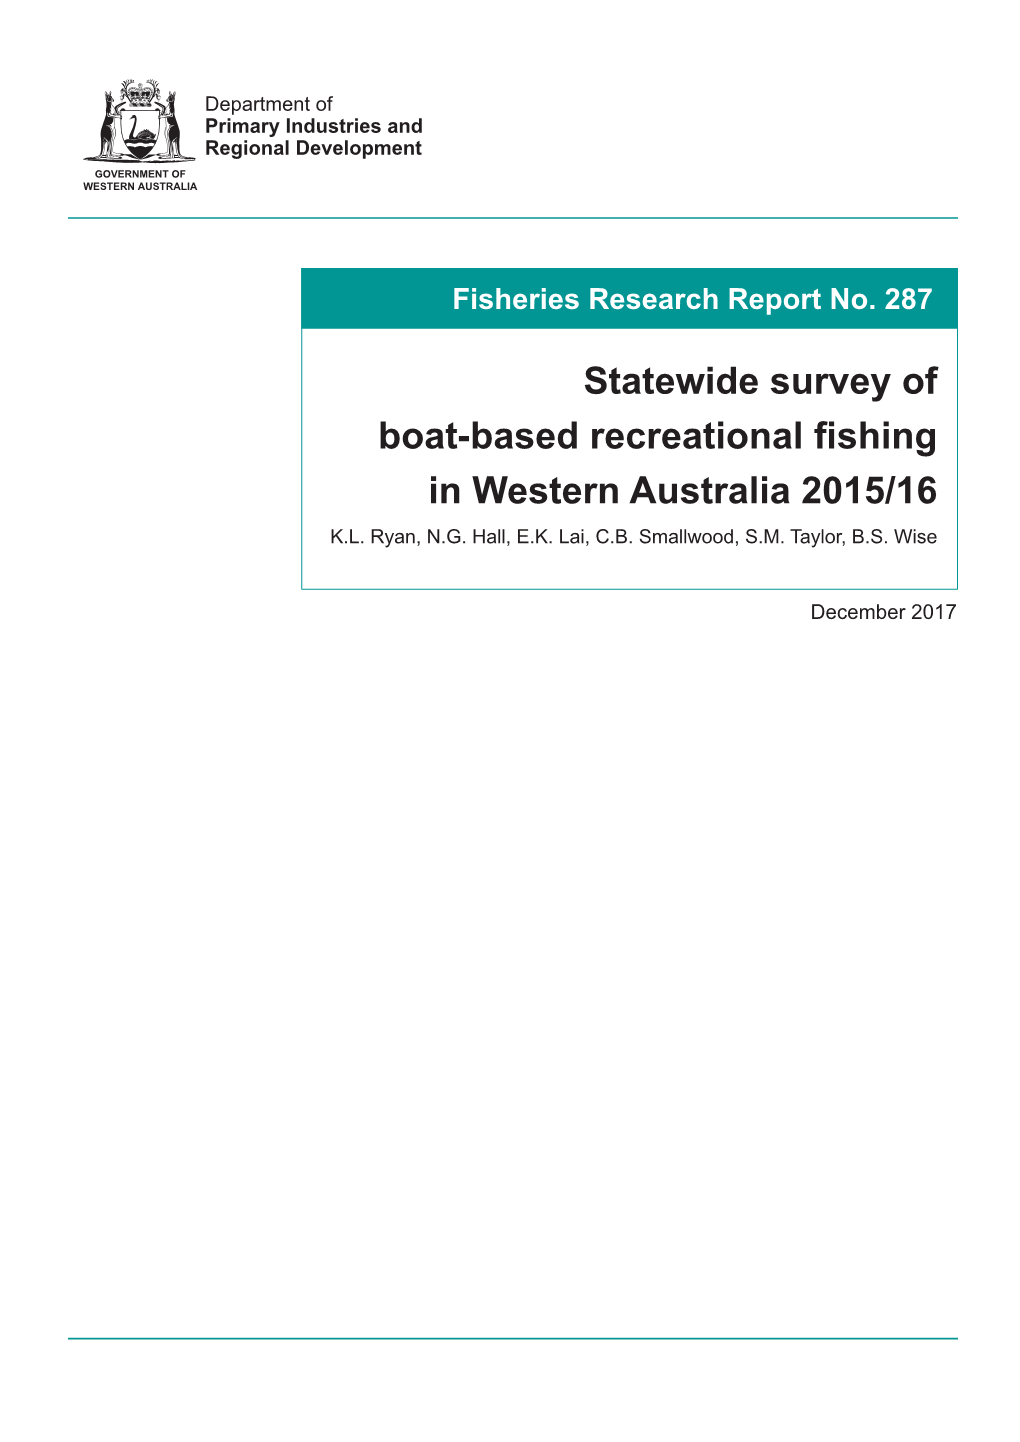 Statewide Survey of Boat-Based Recreational Fishing in Western Australia 2015/16 K.L